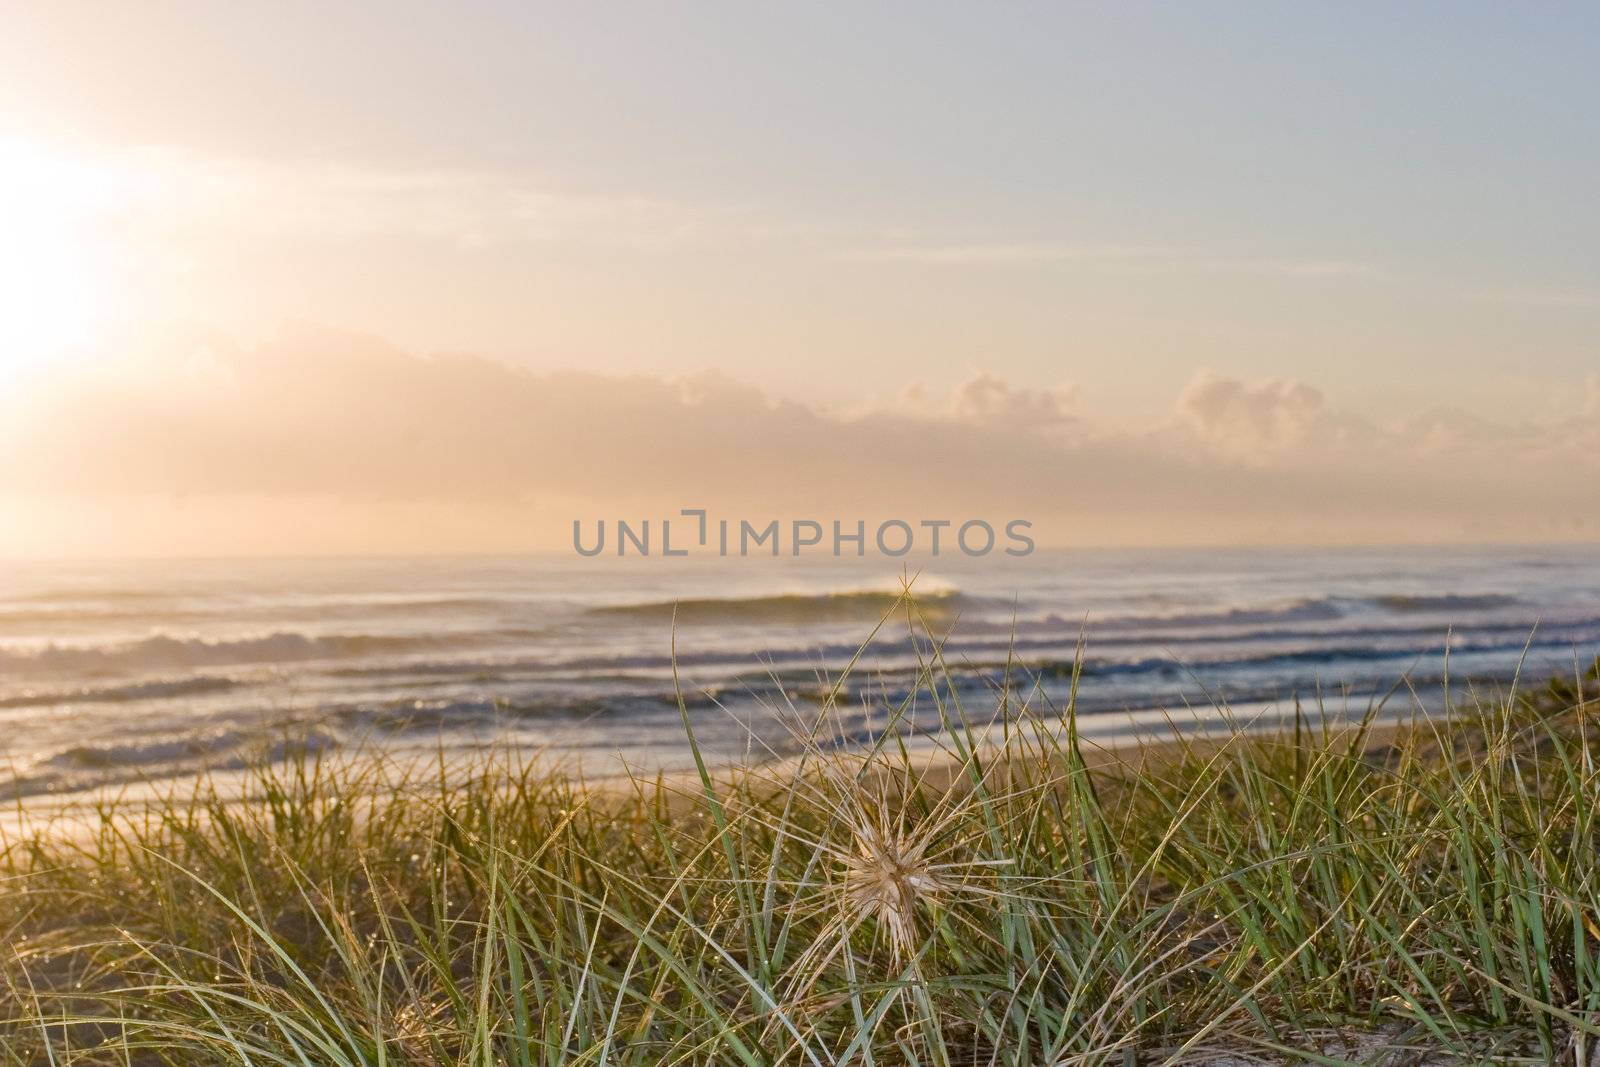 View over dunes and coastal grasses of a delicate ocean sunset and tranquil beach with breaking waves